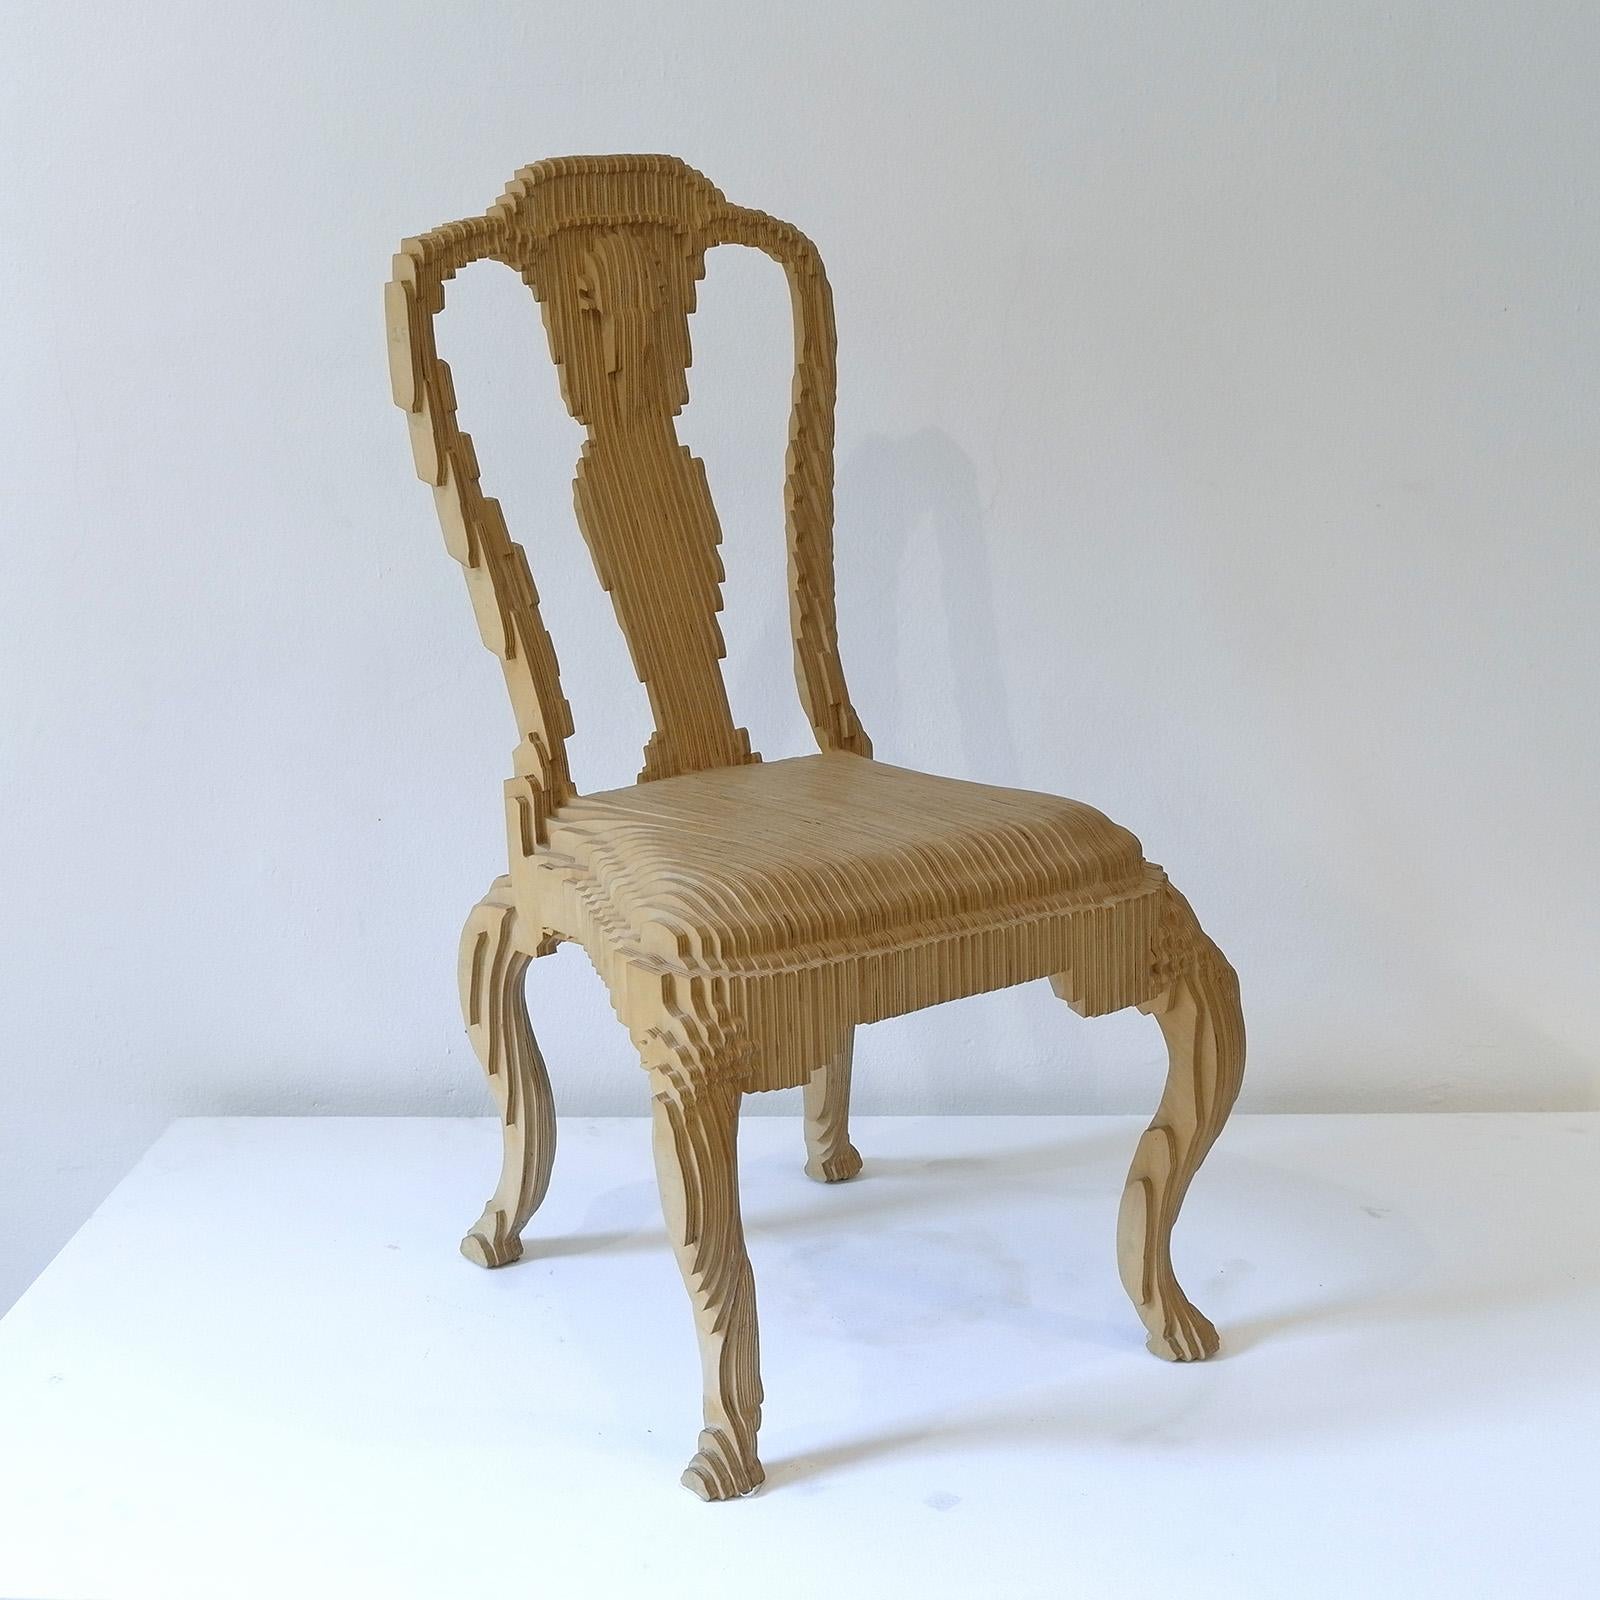 The clone chair is based on a Queen Anne chair from the collection of the Metropolitan museum in New York that has been sampled, digitized and recreated in plywood. The piece keeps an appreciation of the form and formality of the original, but has